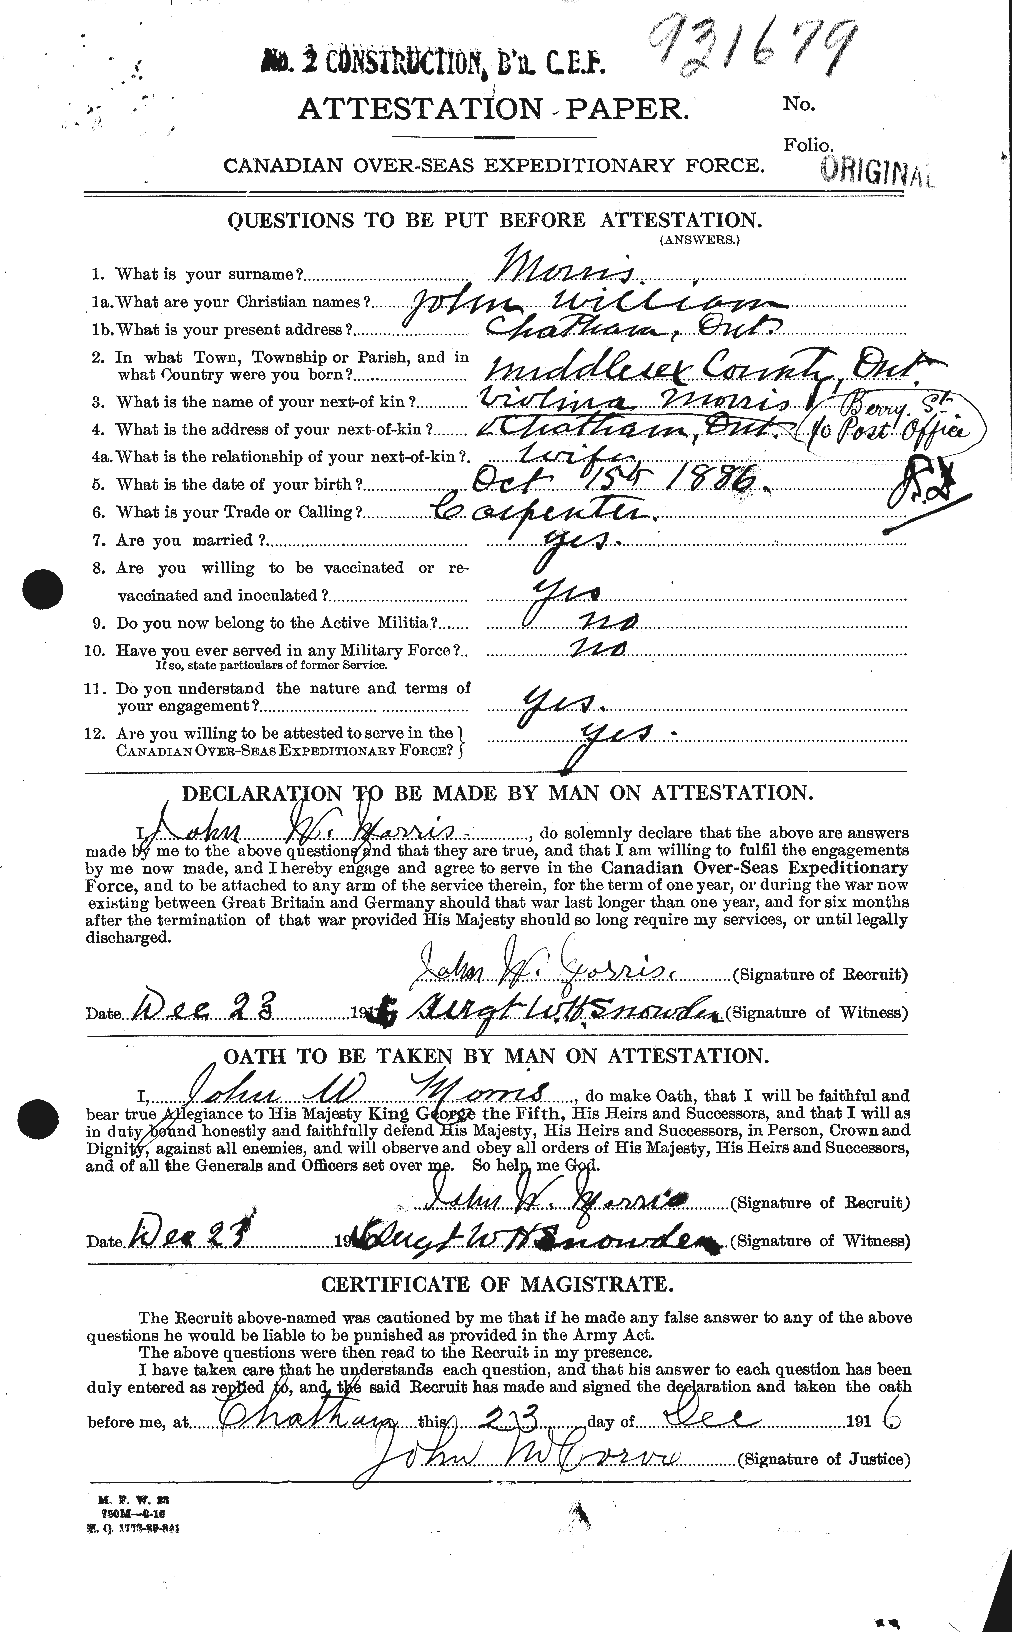 Personnel Records of the First World War - CEF 508543a